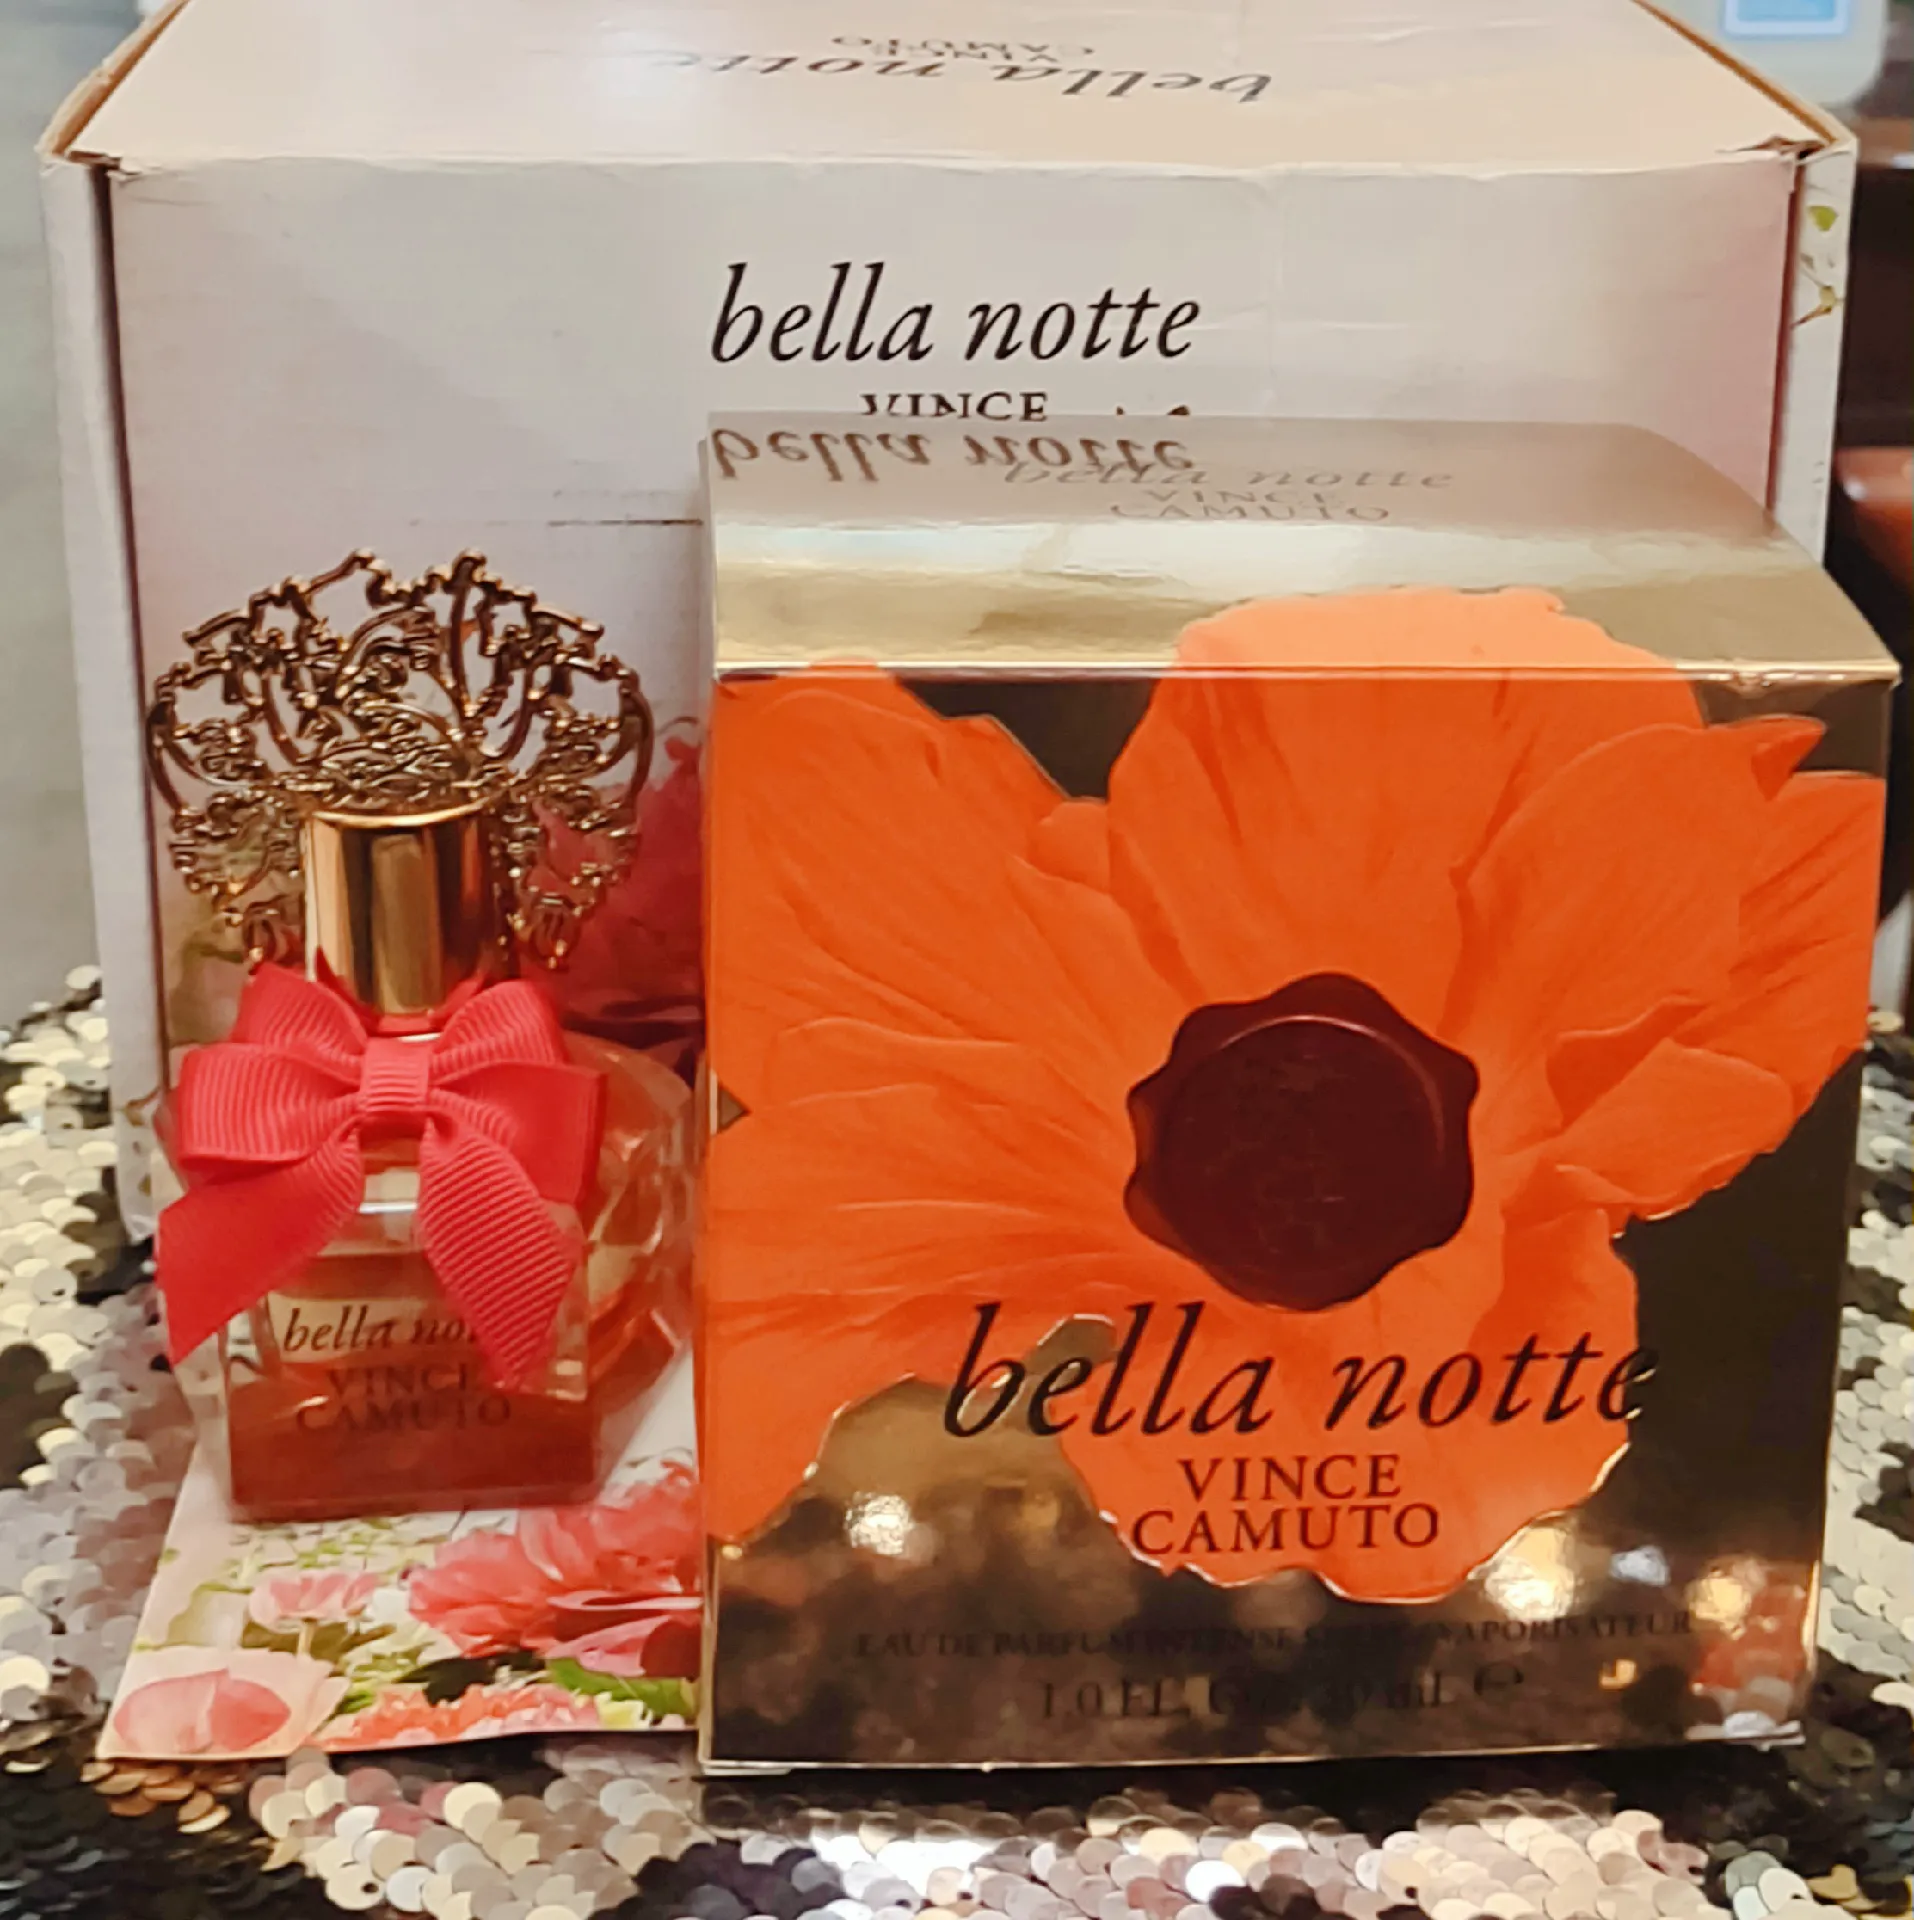 Bella Notte by Vince Camuto » Reviews & Perfume Facts